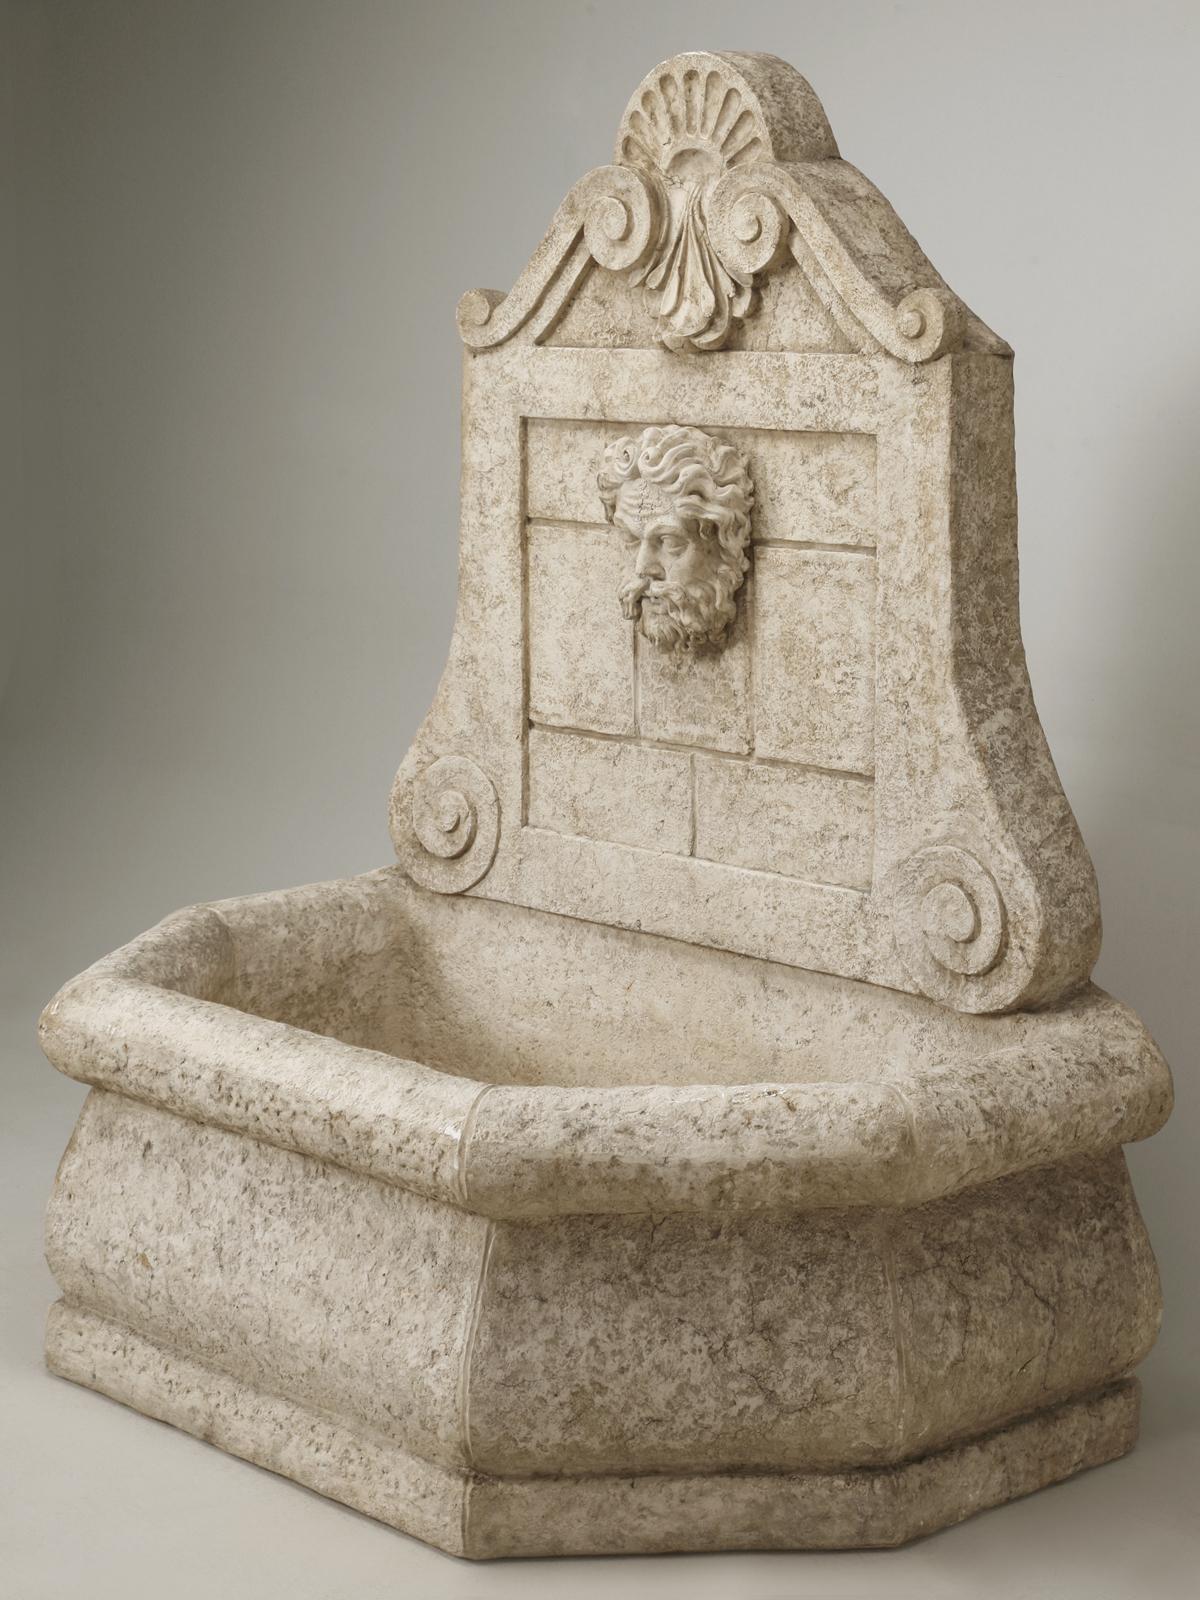 Reproduction 18th century French Style Faux Stone Garden Fountain imported from England during the 1990s. This is a functional Garden Fountain made from fiberglass to look like French Limestone. We have recently taken the liberty of coating the